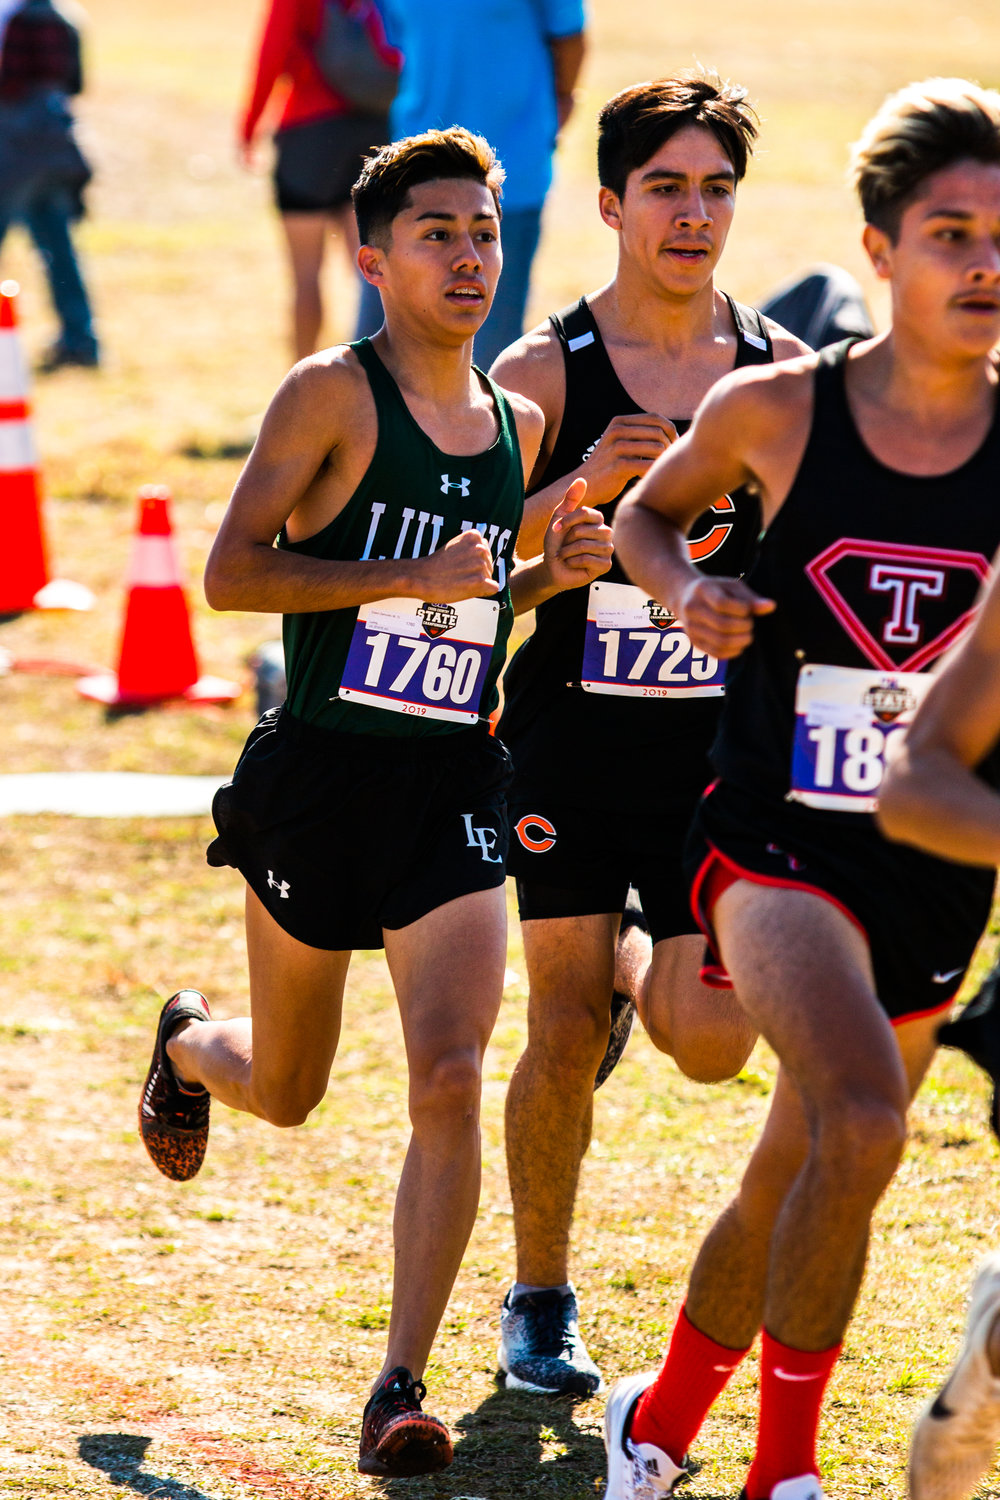 Edwin Zamudio is a state champion, winning the Class 3A boys race with his time of 15:35.87.